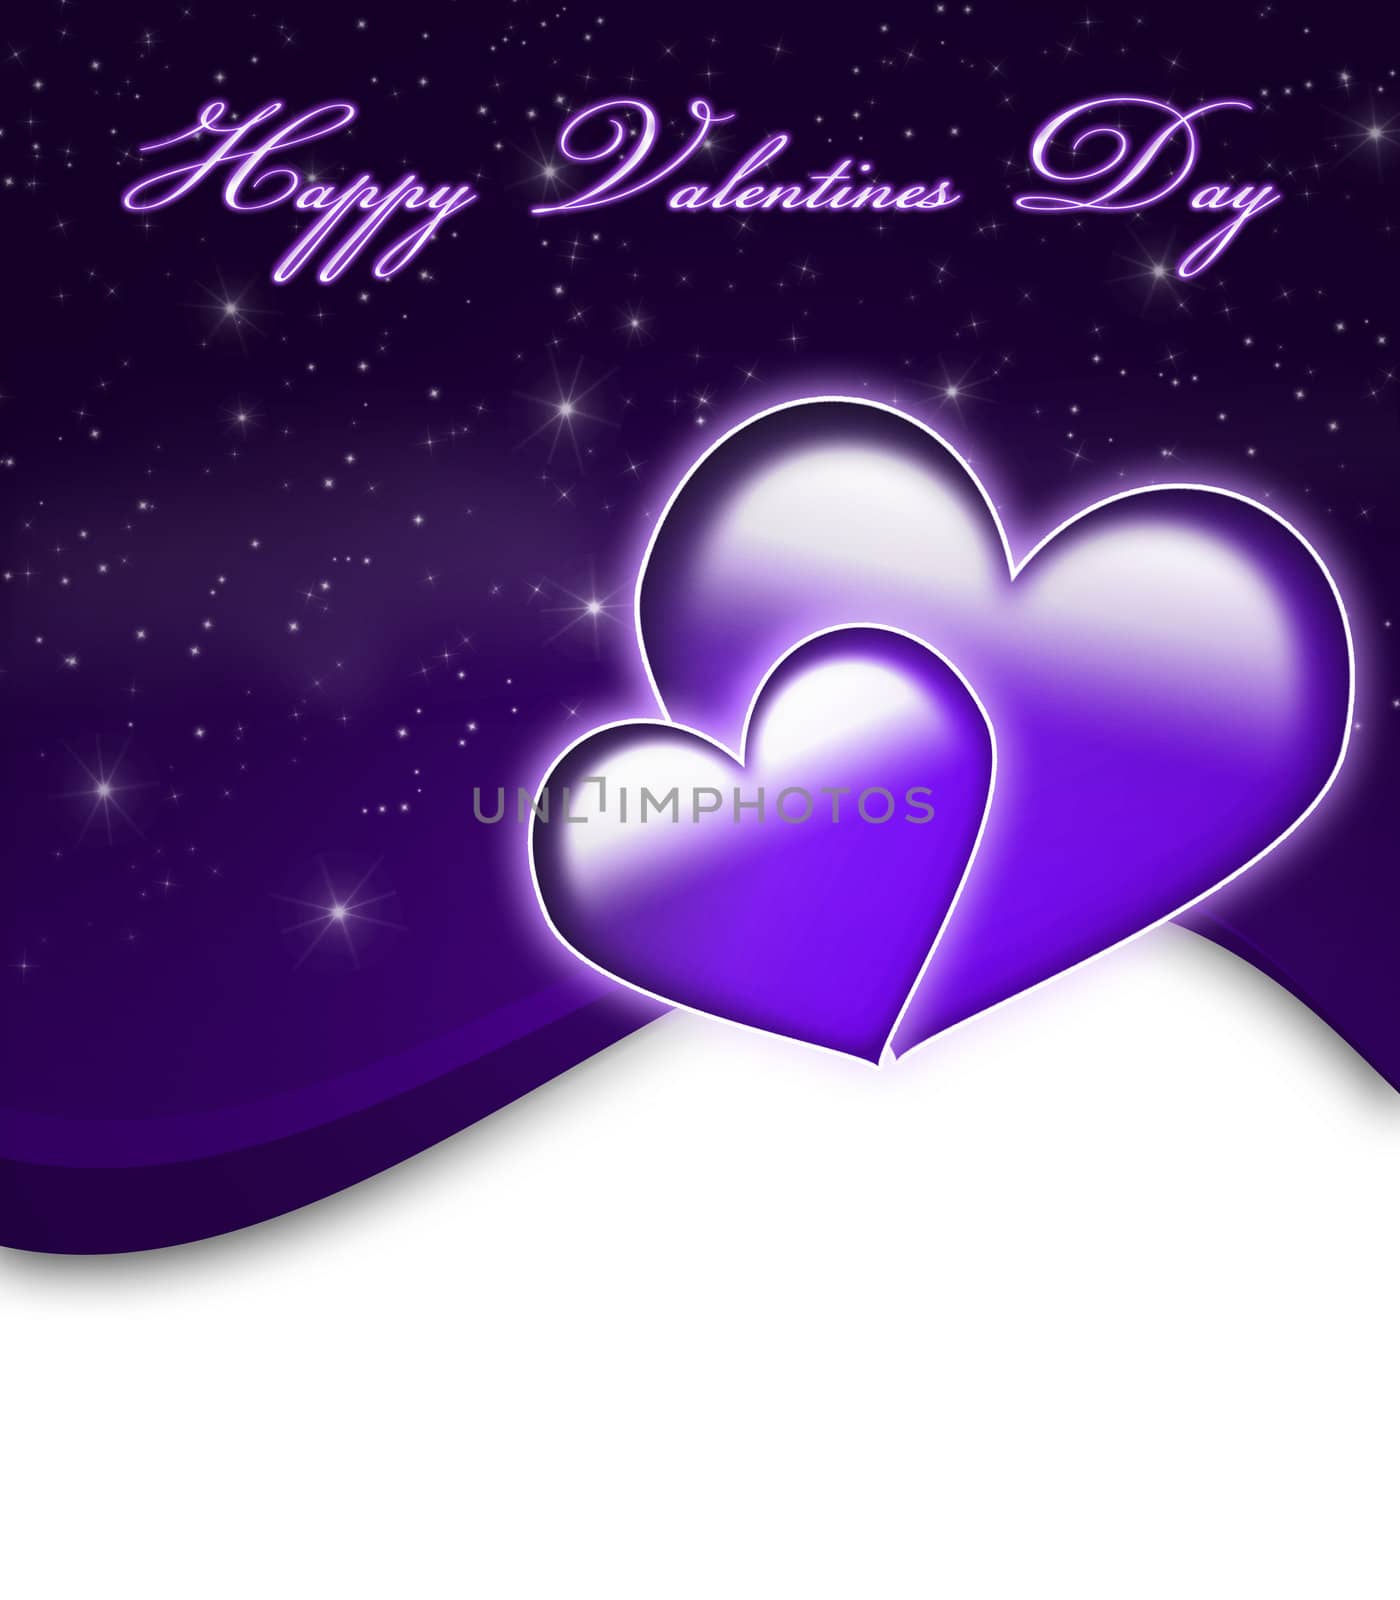 Valentines Day Card with Happy Valentines Day text and two big hearts - all in purple